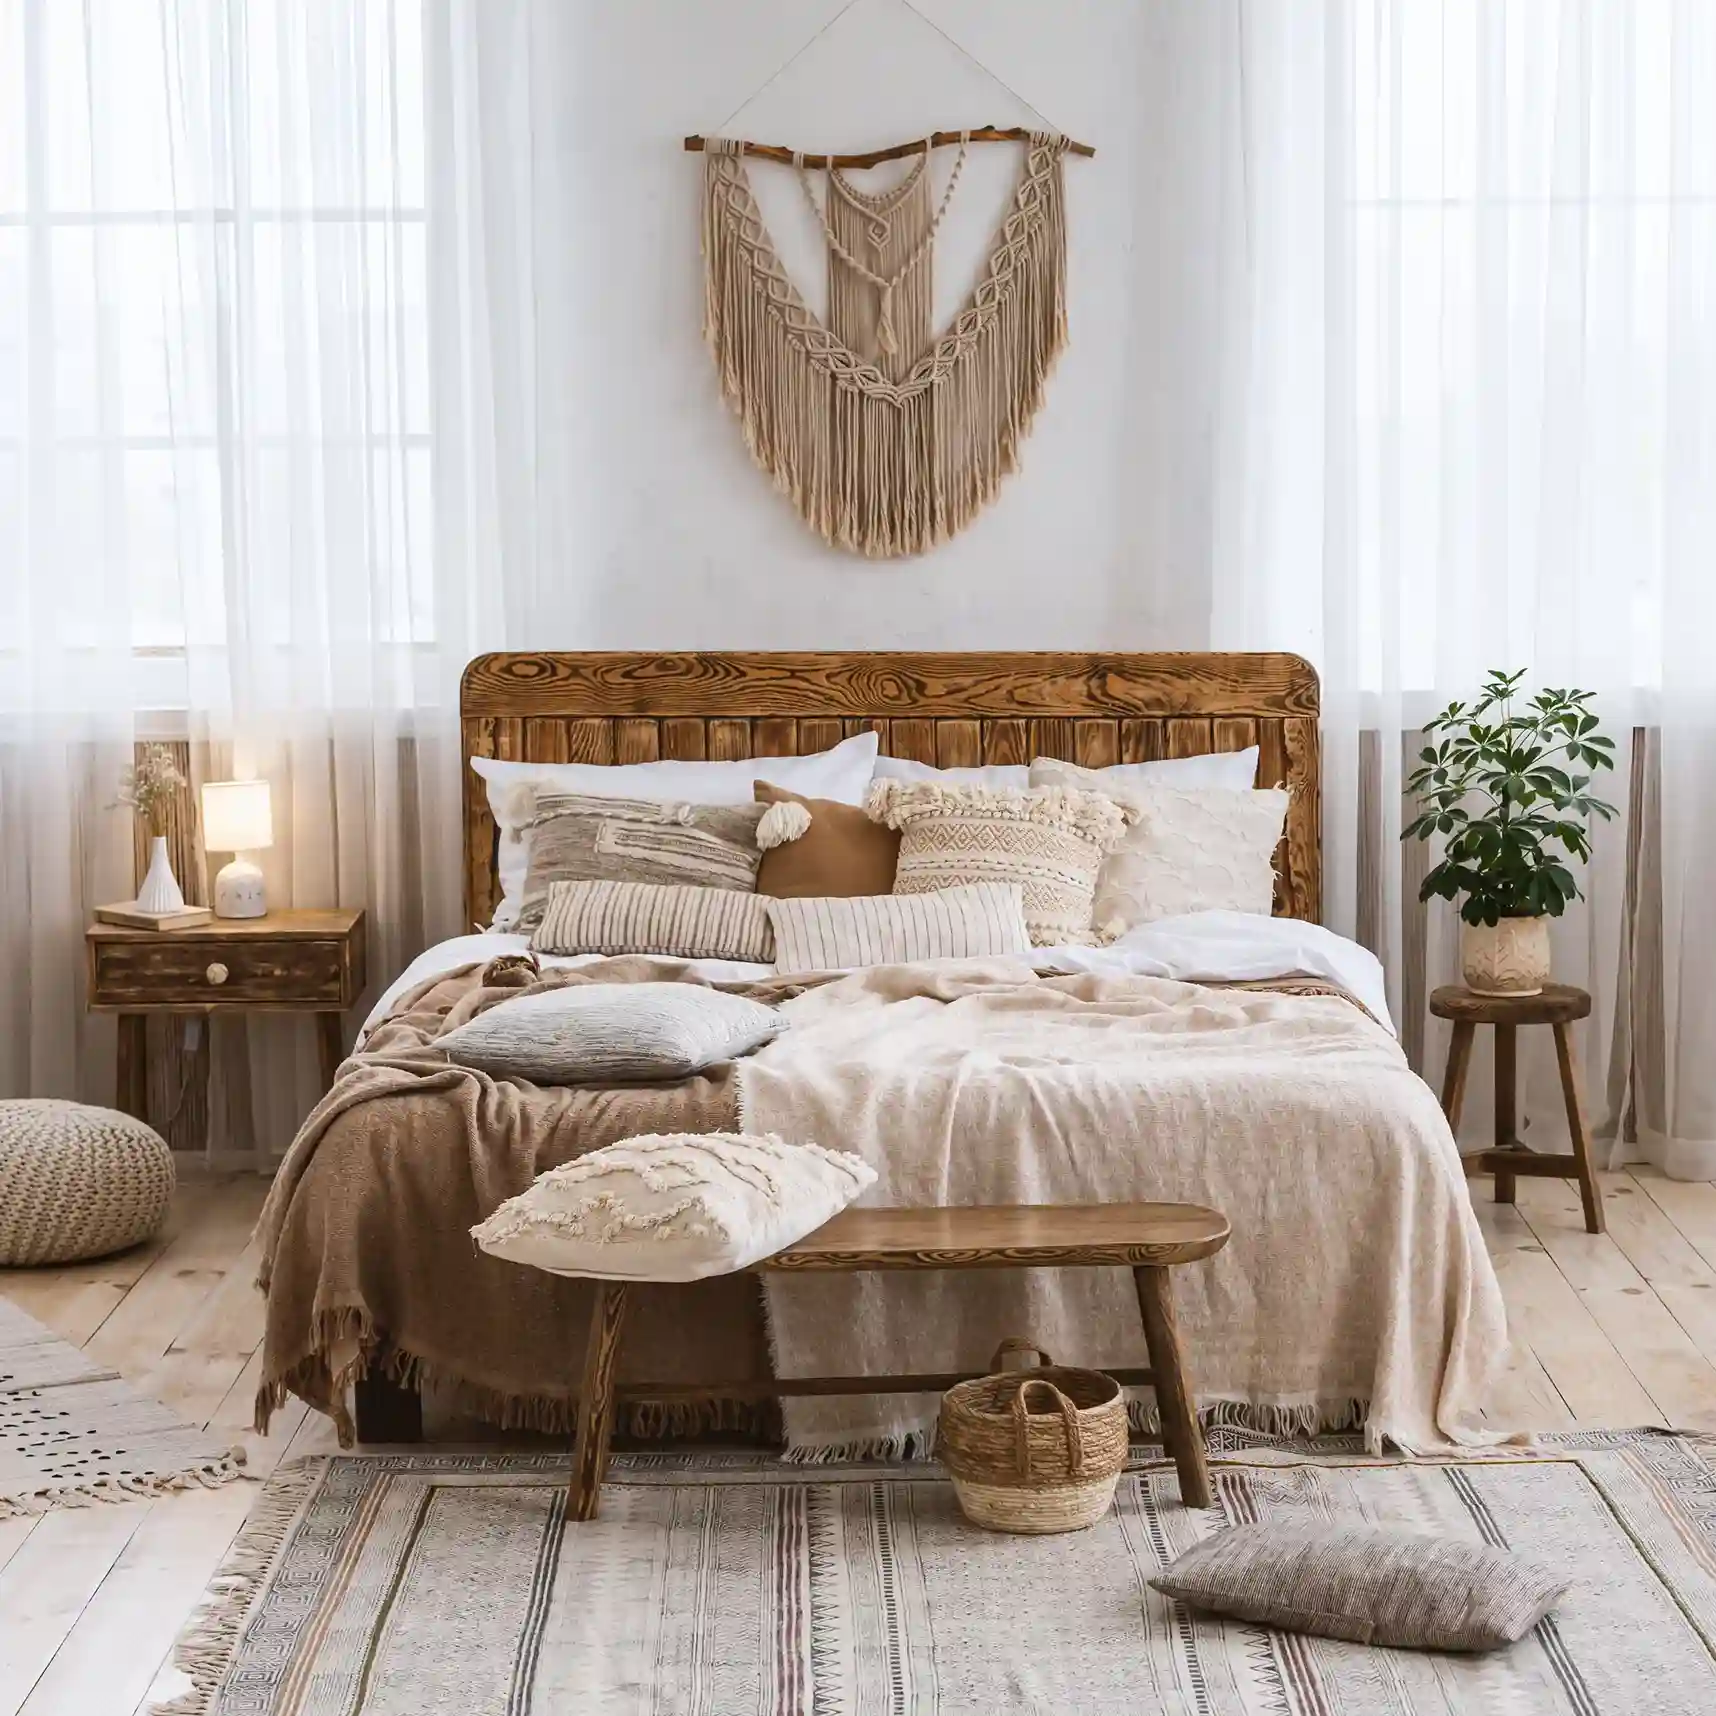 How Wholesale Beds Can Enhance the Aesthetics of a Bedroom